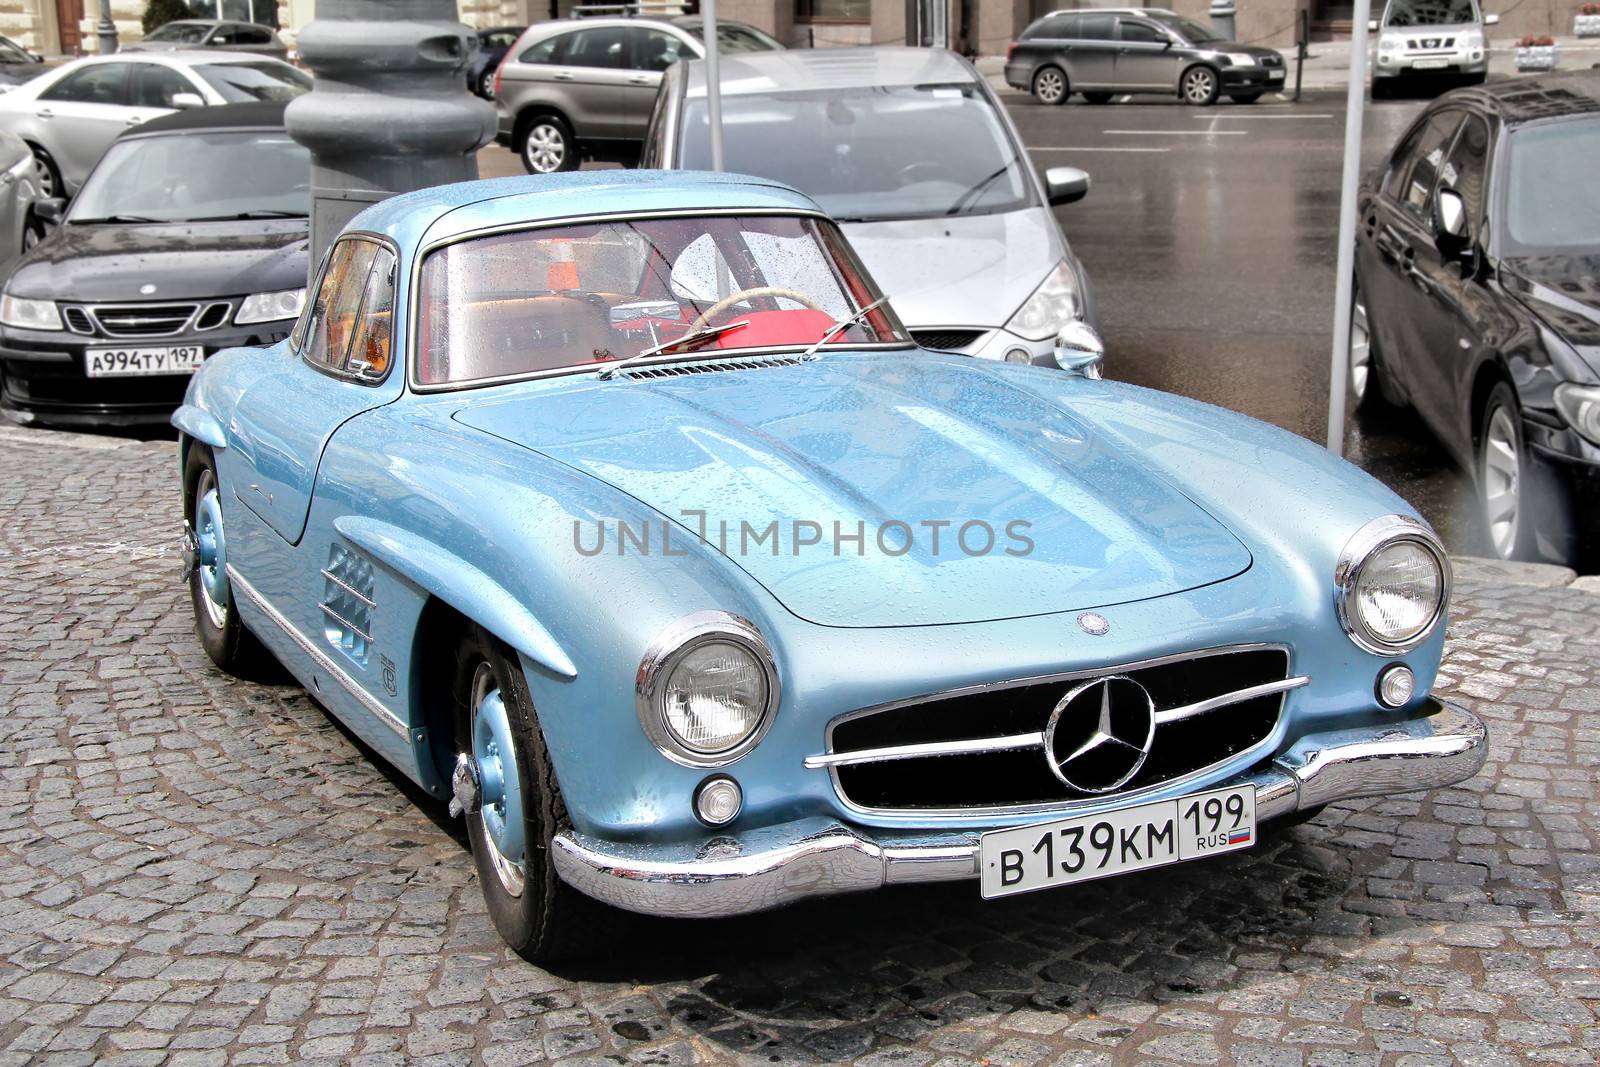 MOSCOW, RUSSIA - JUNE 3: German motor car Mercedes-Benz 300SL competes at the annual L.U.C. Chopard Classic Weekend Rally on June 3, 2012 in Moscow, Russia.